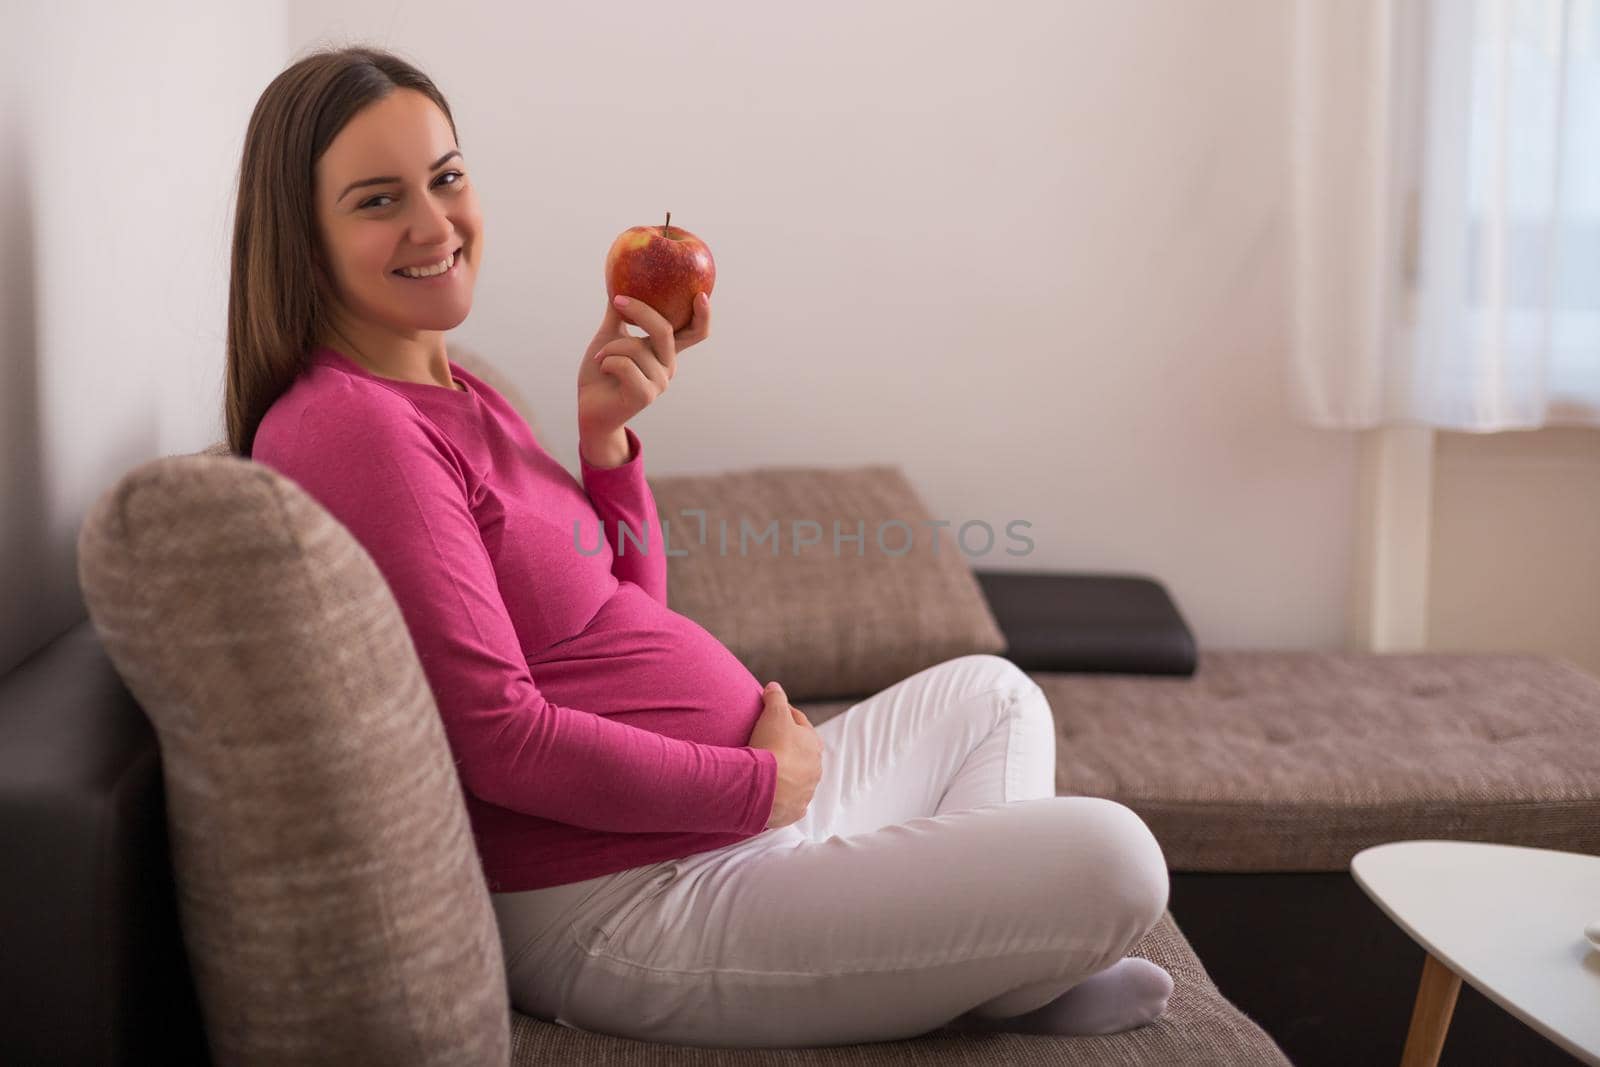 Happy pregnant woman eating apple.